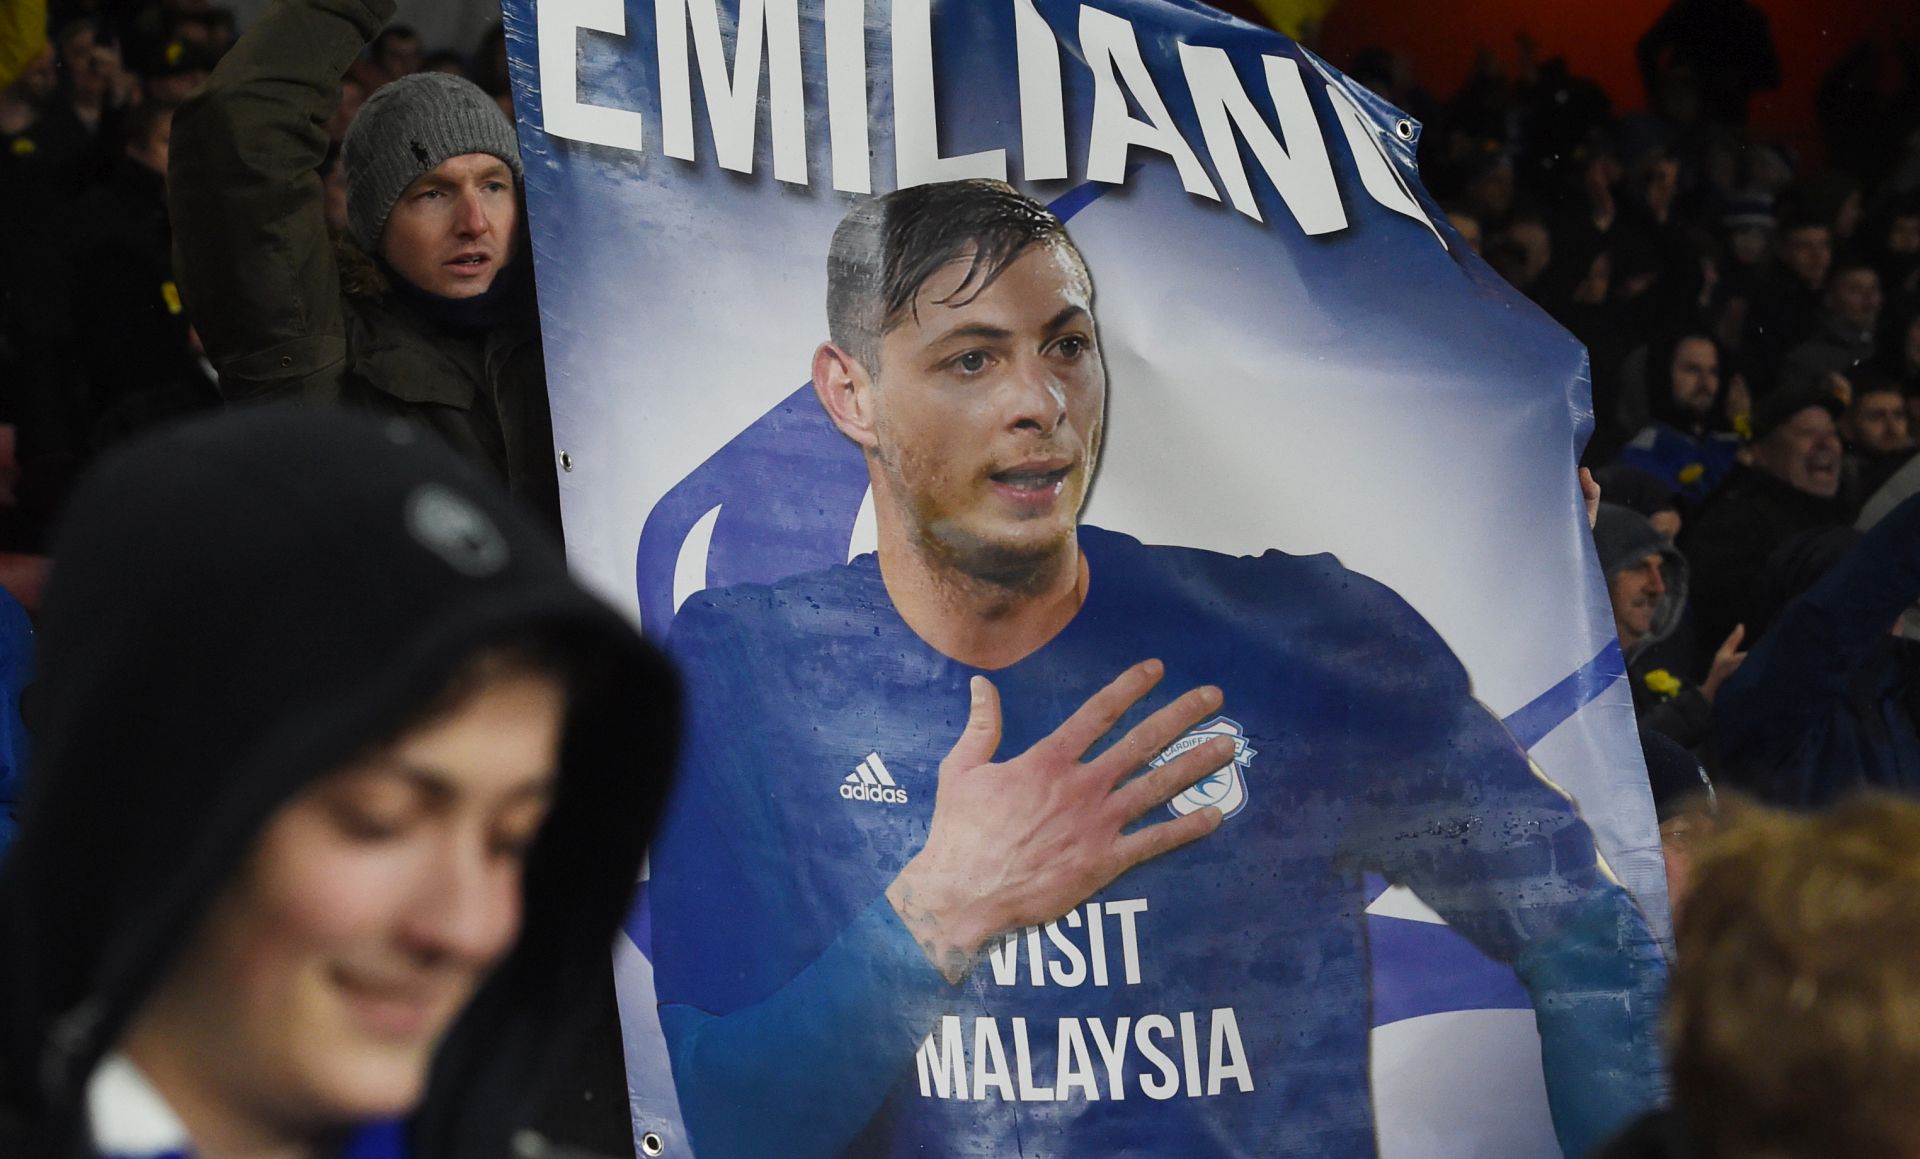 epa07330574 Cardiff City supporters display tributes for Argentinian soccer player Emiliano Sala, who went missing on 21 January 2019 after a light aicraft he was travelling in from Nantes in France to Cardiff disapeared over the English Channel, during the English Premier League soccer match between Arsenal and Cardiff City at the Emirates stadium in London, Britain, 29 January 2019.  EPA/FACUNDO ARRIZABALAGA EDITORIAL USE ONLY. No use with unauthorized audio, video, data, fixture lists, club/league logos or 'live' services. Online in-match use limited to 120 images, no video emulation. No use in betting, games or single club/league/player publications